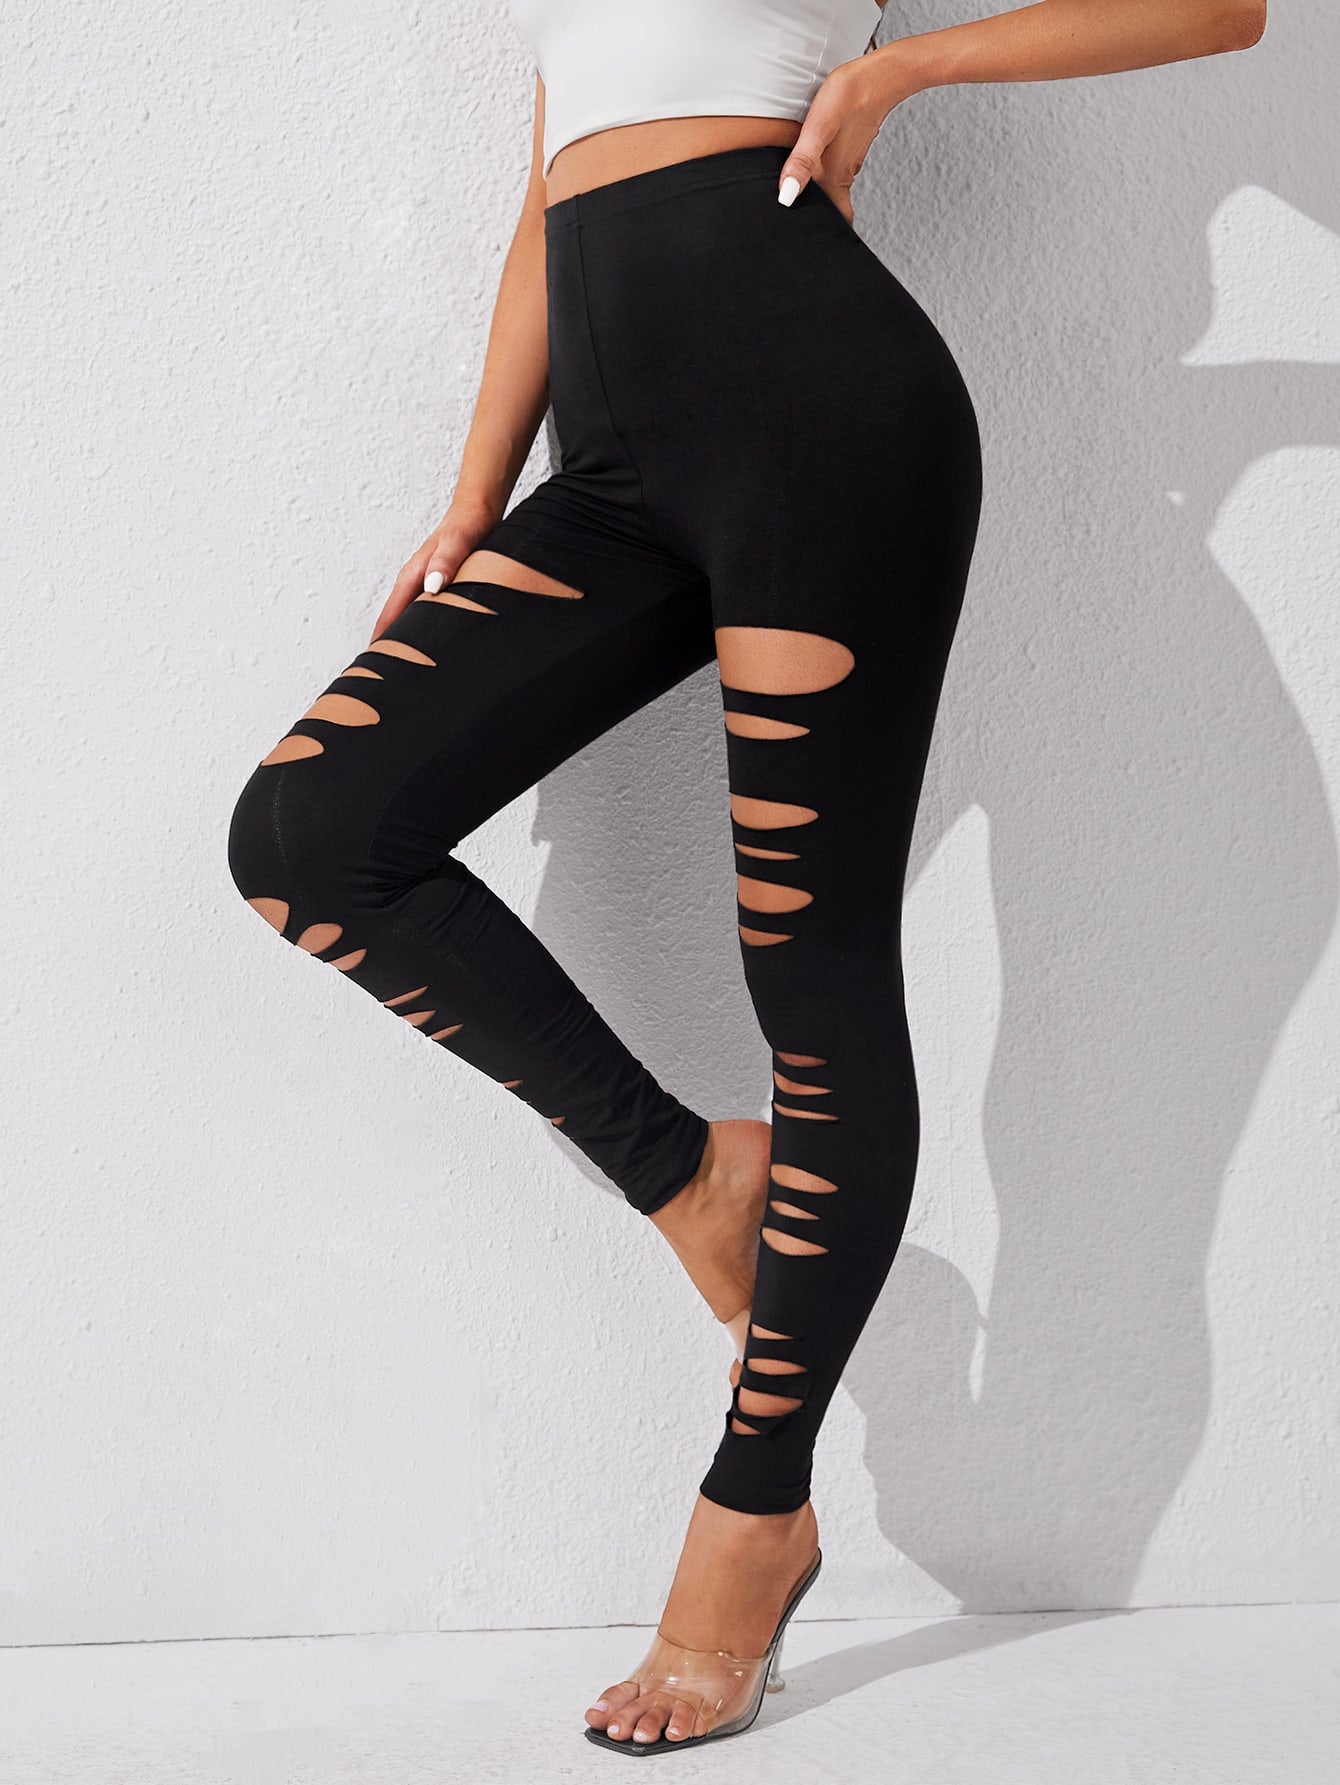 Retro Front Cut Out High Slit Lace-up Ninth Black Chic Girl's Skinny Legging  | Fashion Leggings | Clothing & Apparel- ByGoods.Com